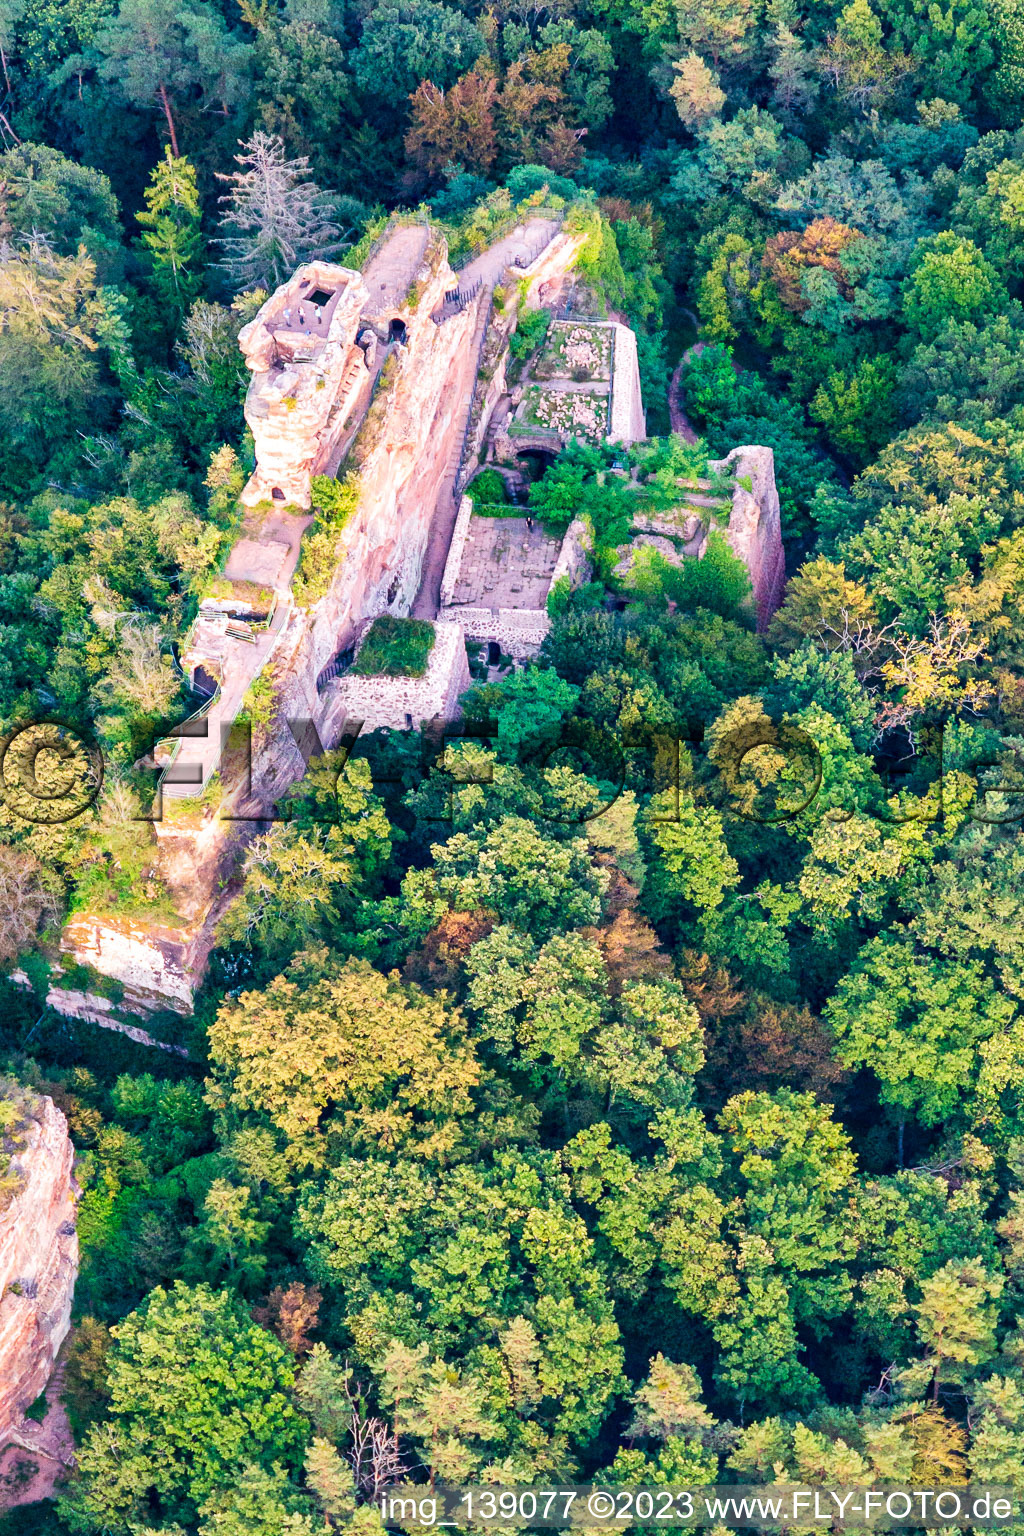 Drachenfels Castle in Busenberg in the state Rhineland-Palatinate, Germany seen from above